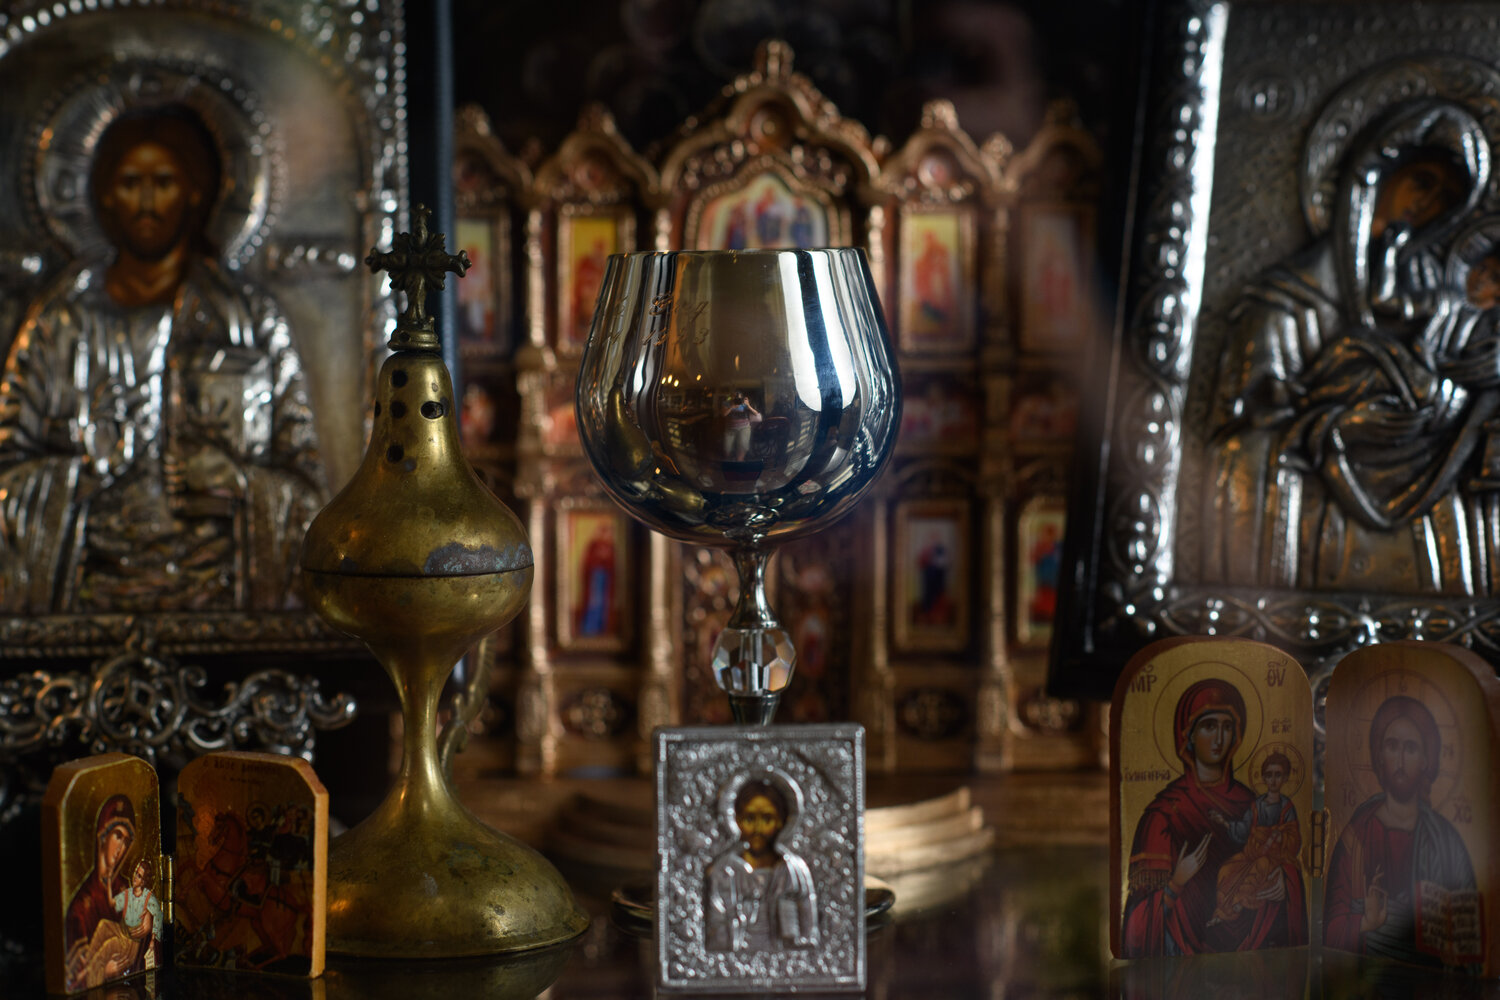 a goblet from Greg and Effie Kalevases’ wedding is on display with iconography from Greece at her family’s home in Fayetteville.